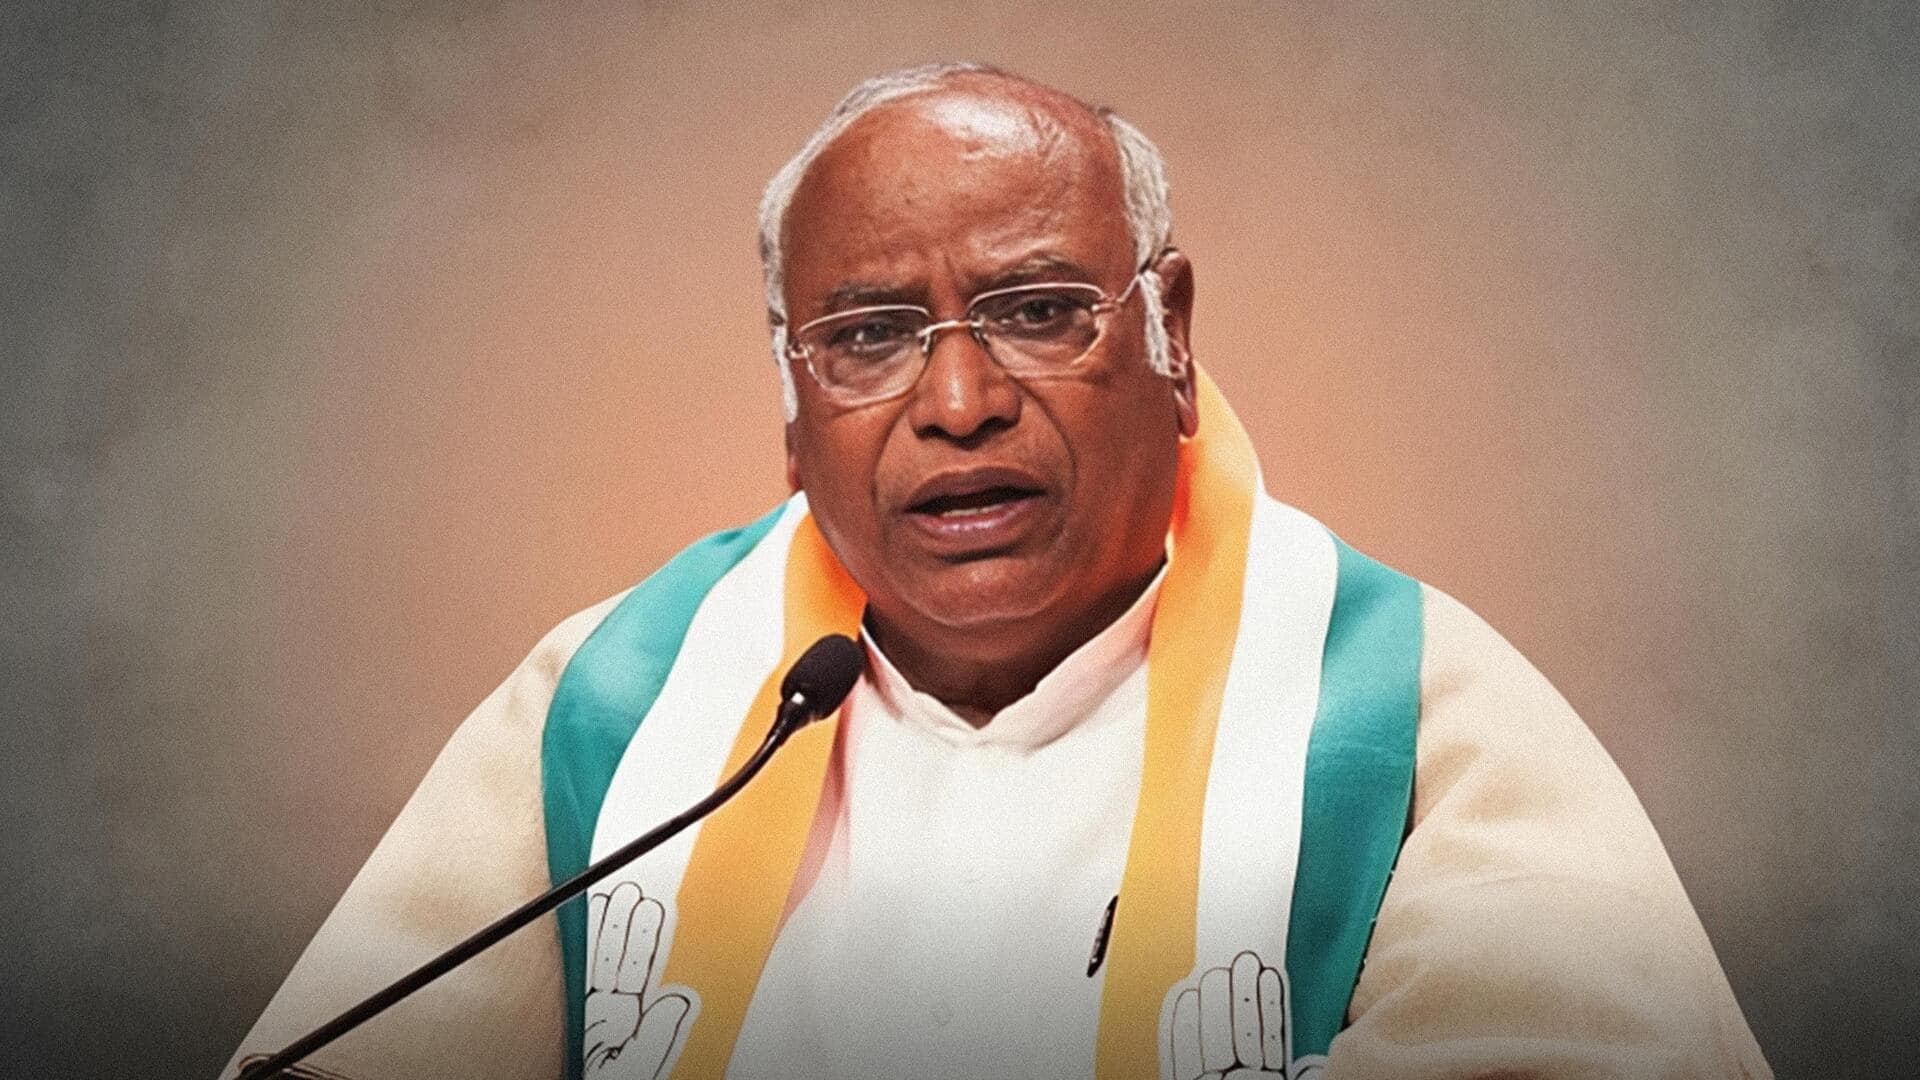 Modi spoke of 'divisive issues' 421 times during campaigning: Kharge